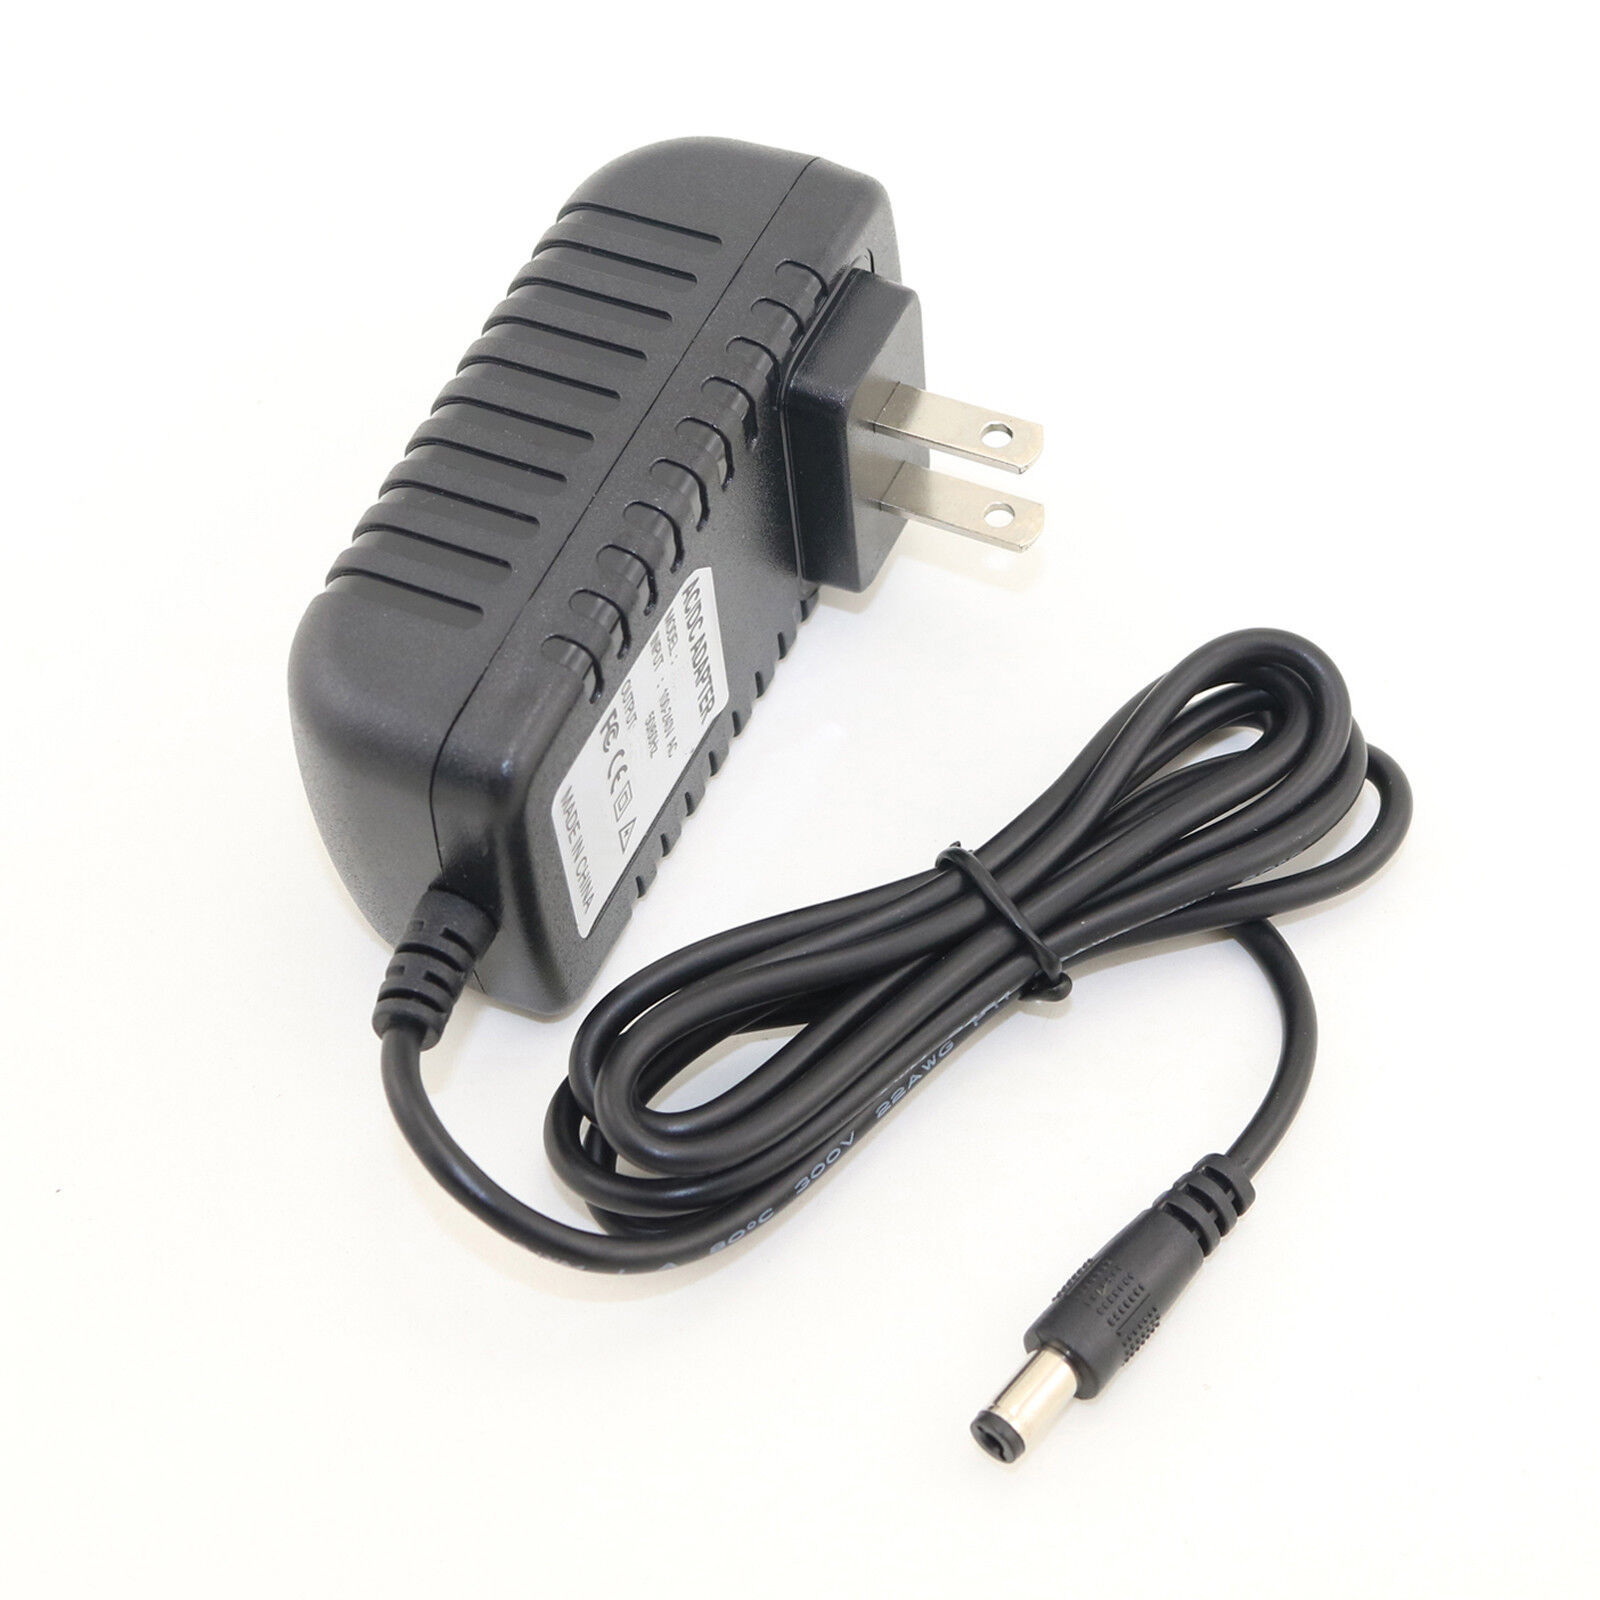 Ac Adapter For Dymo Labelmanager Lm100 Lp250 Lm110 Label Maker Power Supply Cord - $21.99